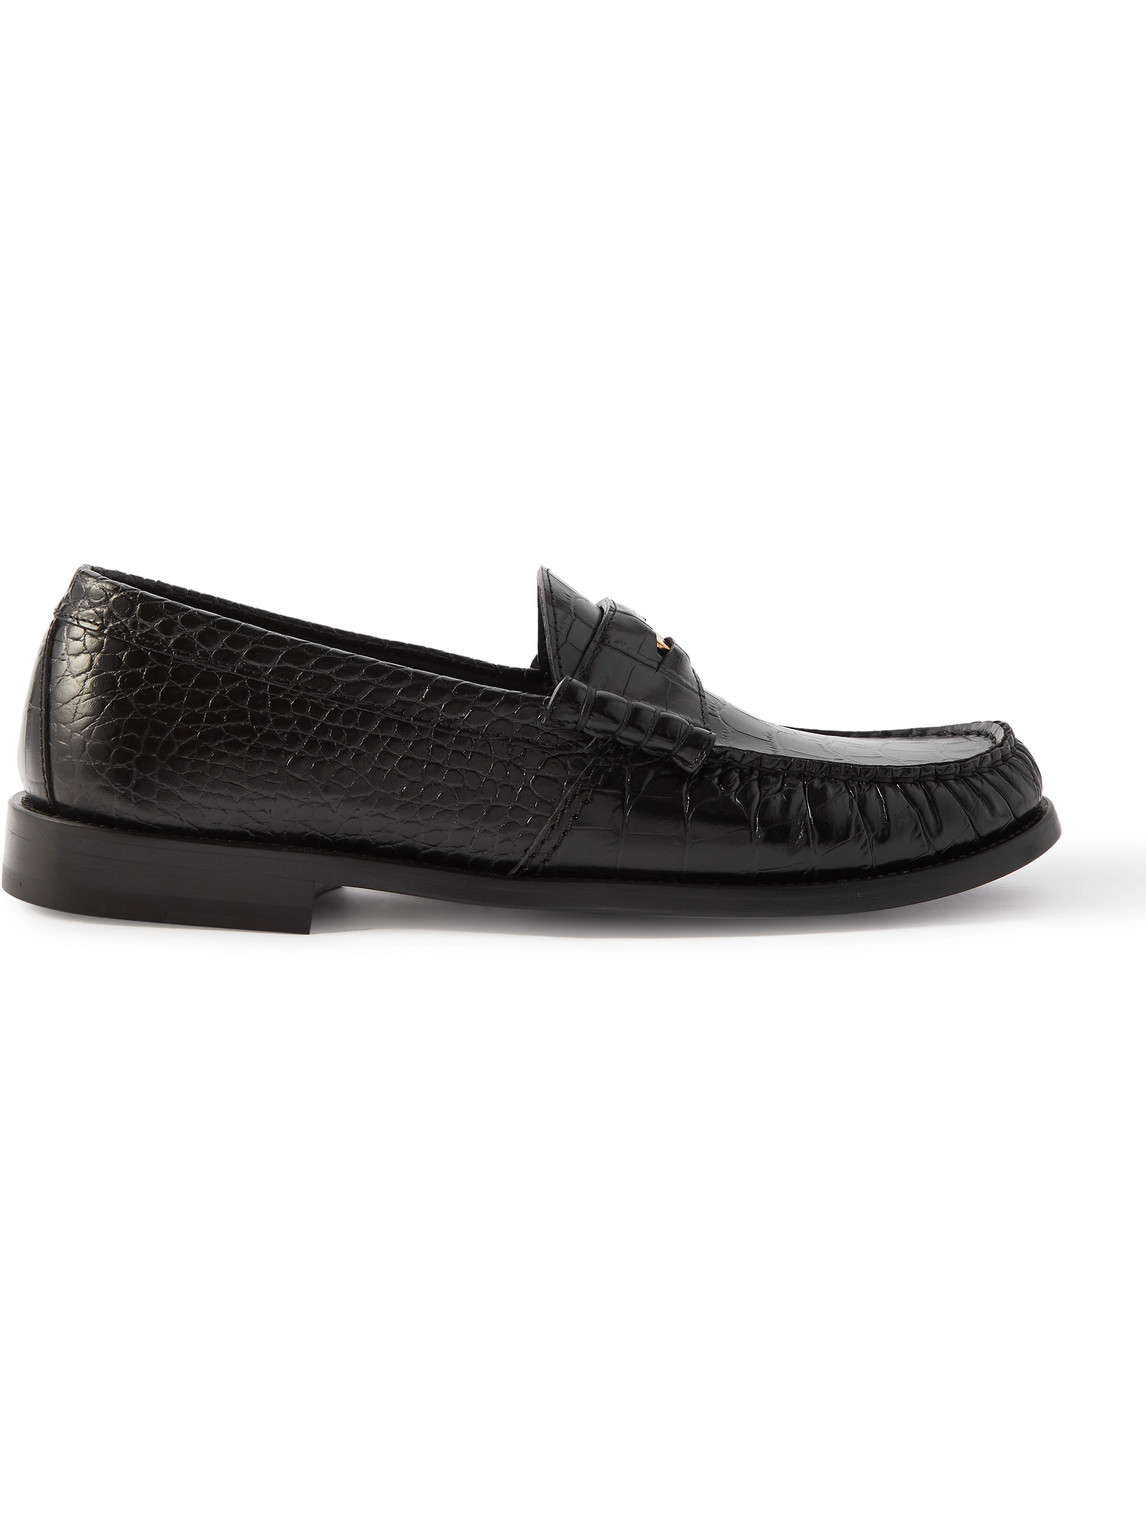 Croc-Effect Leather Penny Loafers